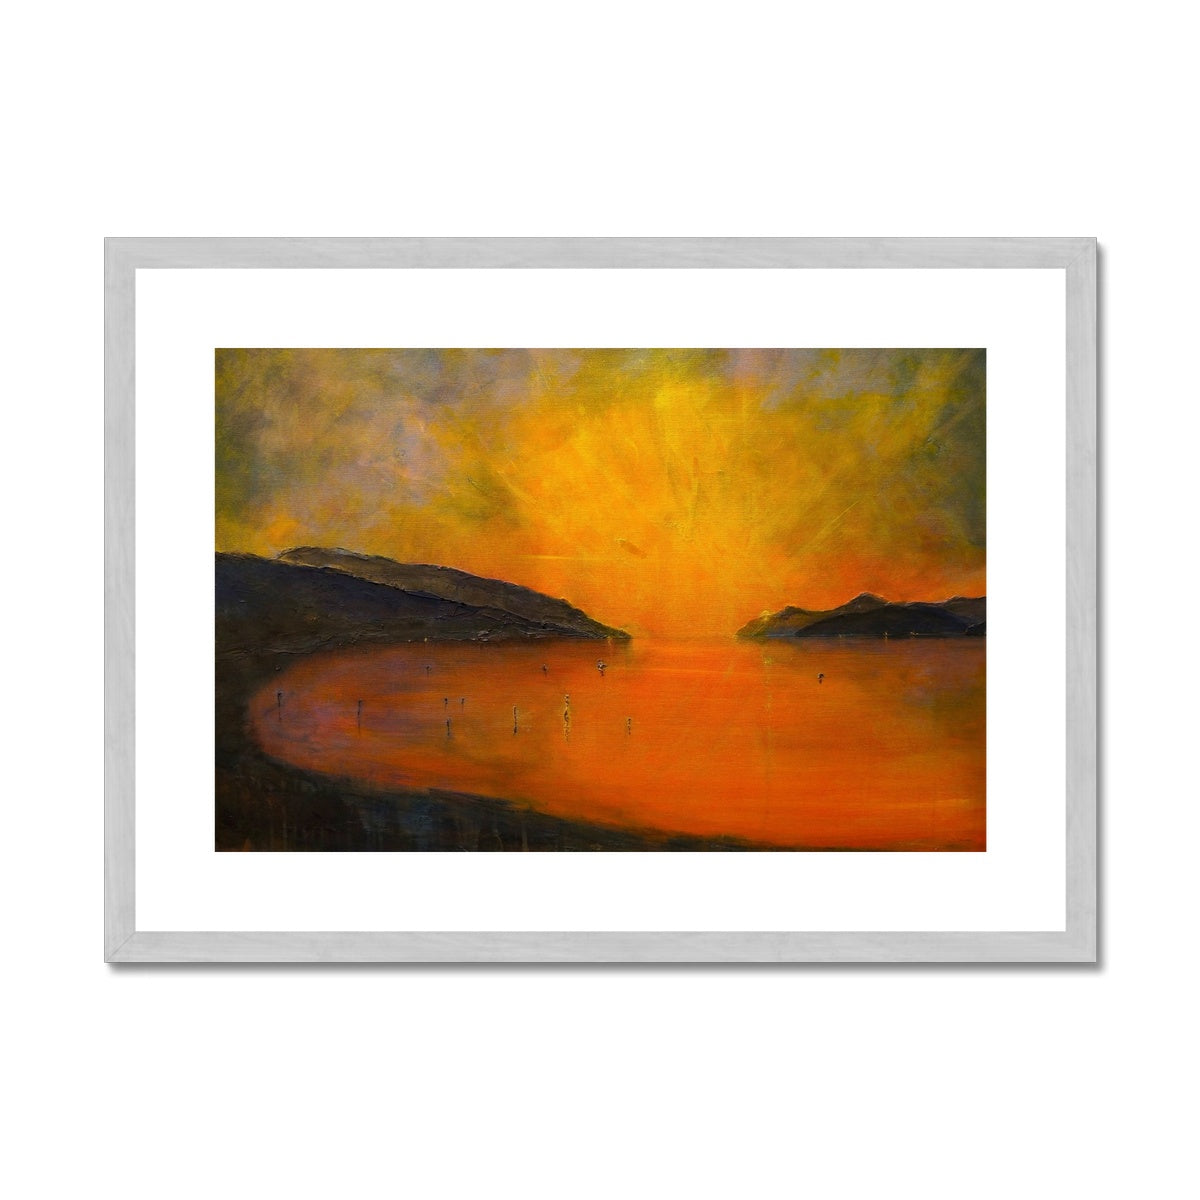 Loch Ness Sunset Painting | Antique Framed & Mounted Prints From Scotland-Antique Framed & Mounted Prints-Scottish Lochs & Mountains Art Gallery-A2 Landscape-Silver Frame-Paintings, Prints, Homeware, Art Gifts From Scotland By Scottish Artist Kevin Hunter